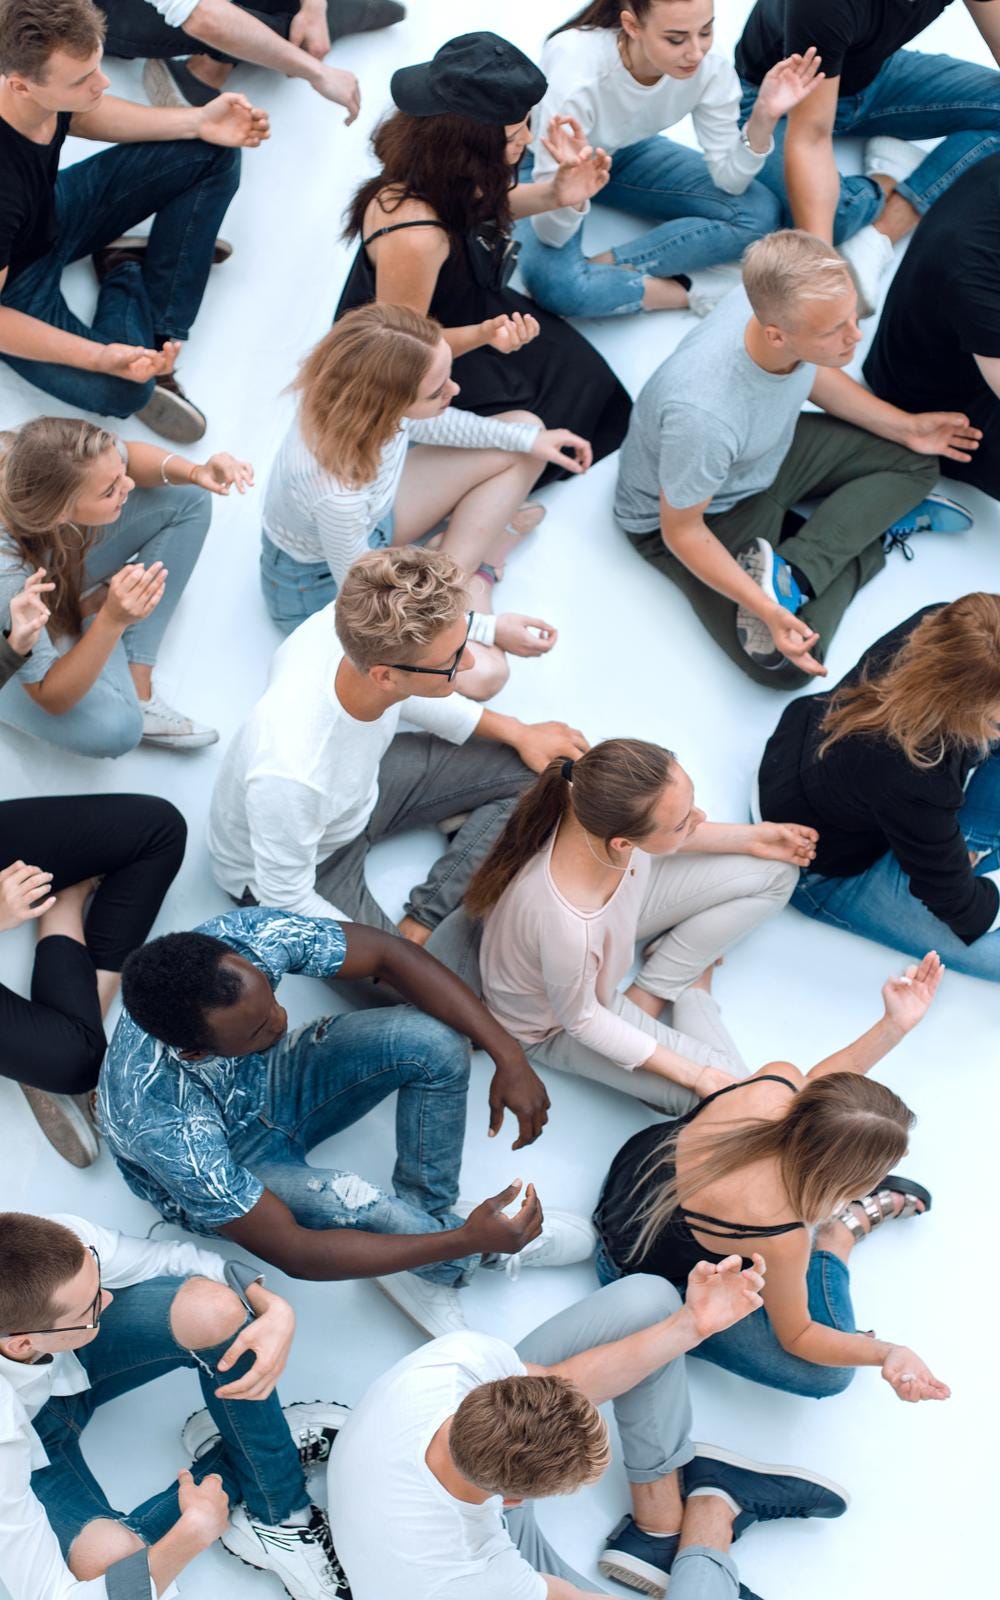 Group of young people seated on the floor meditating